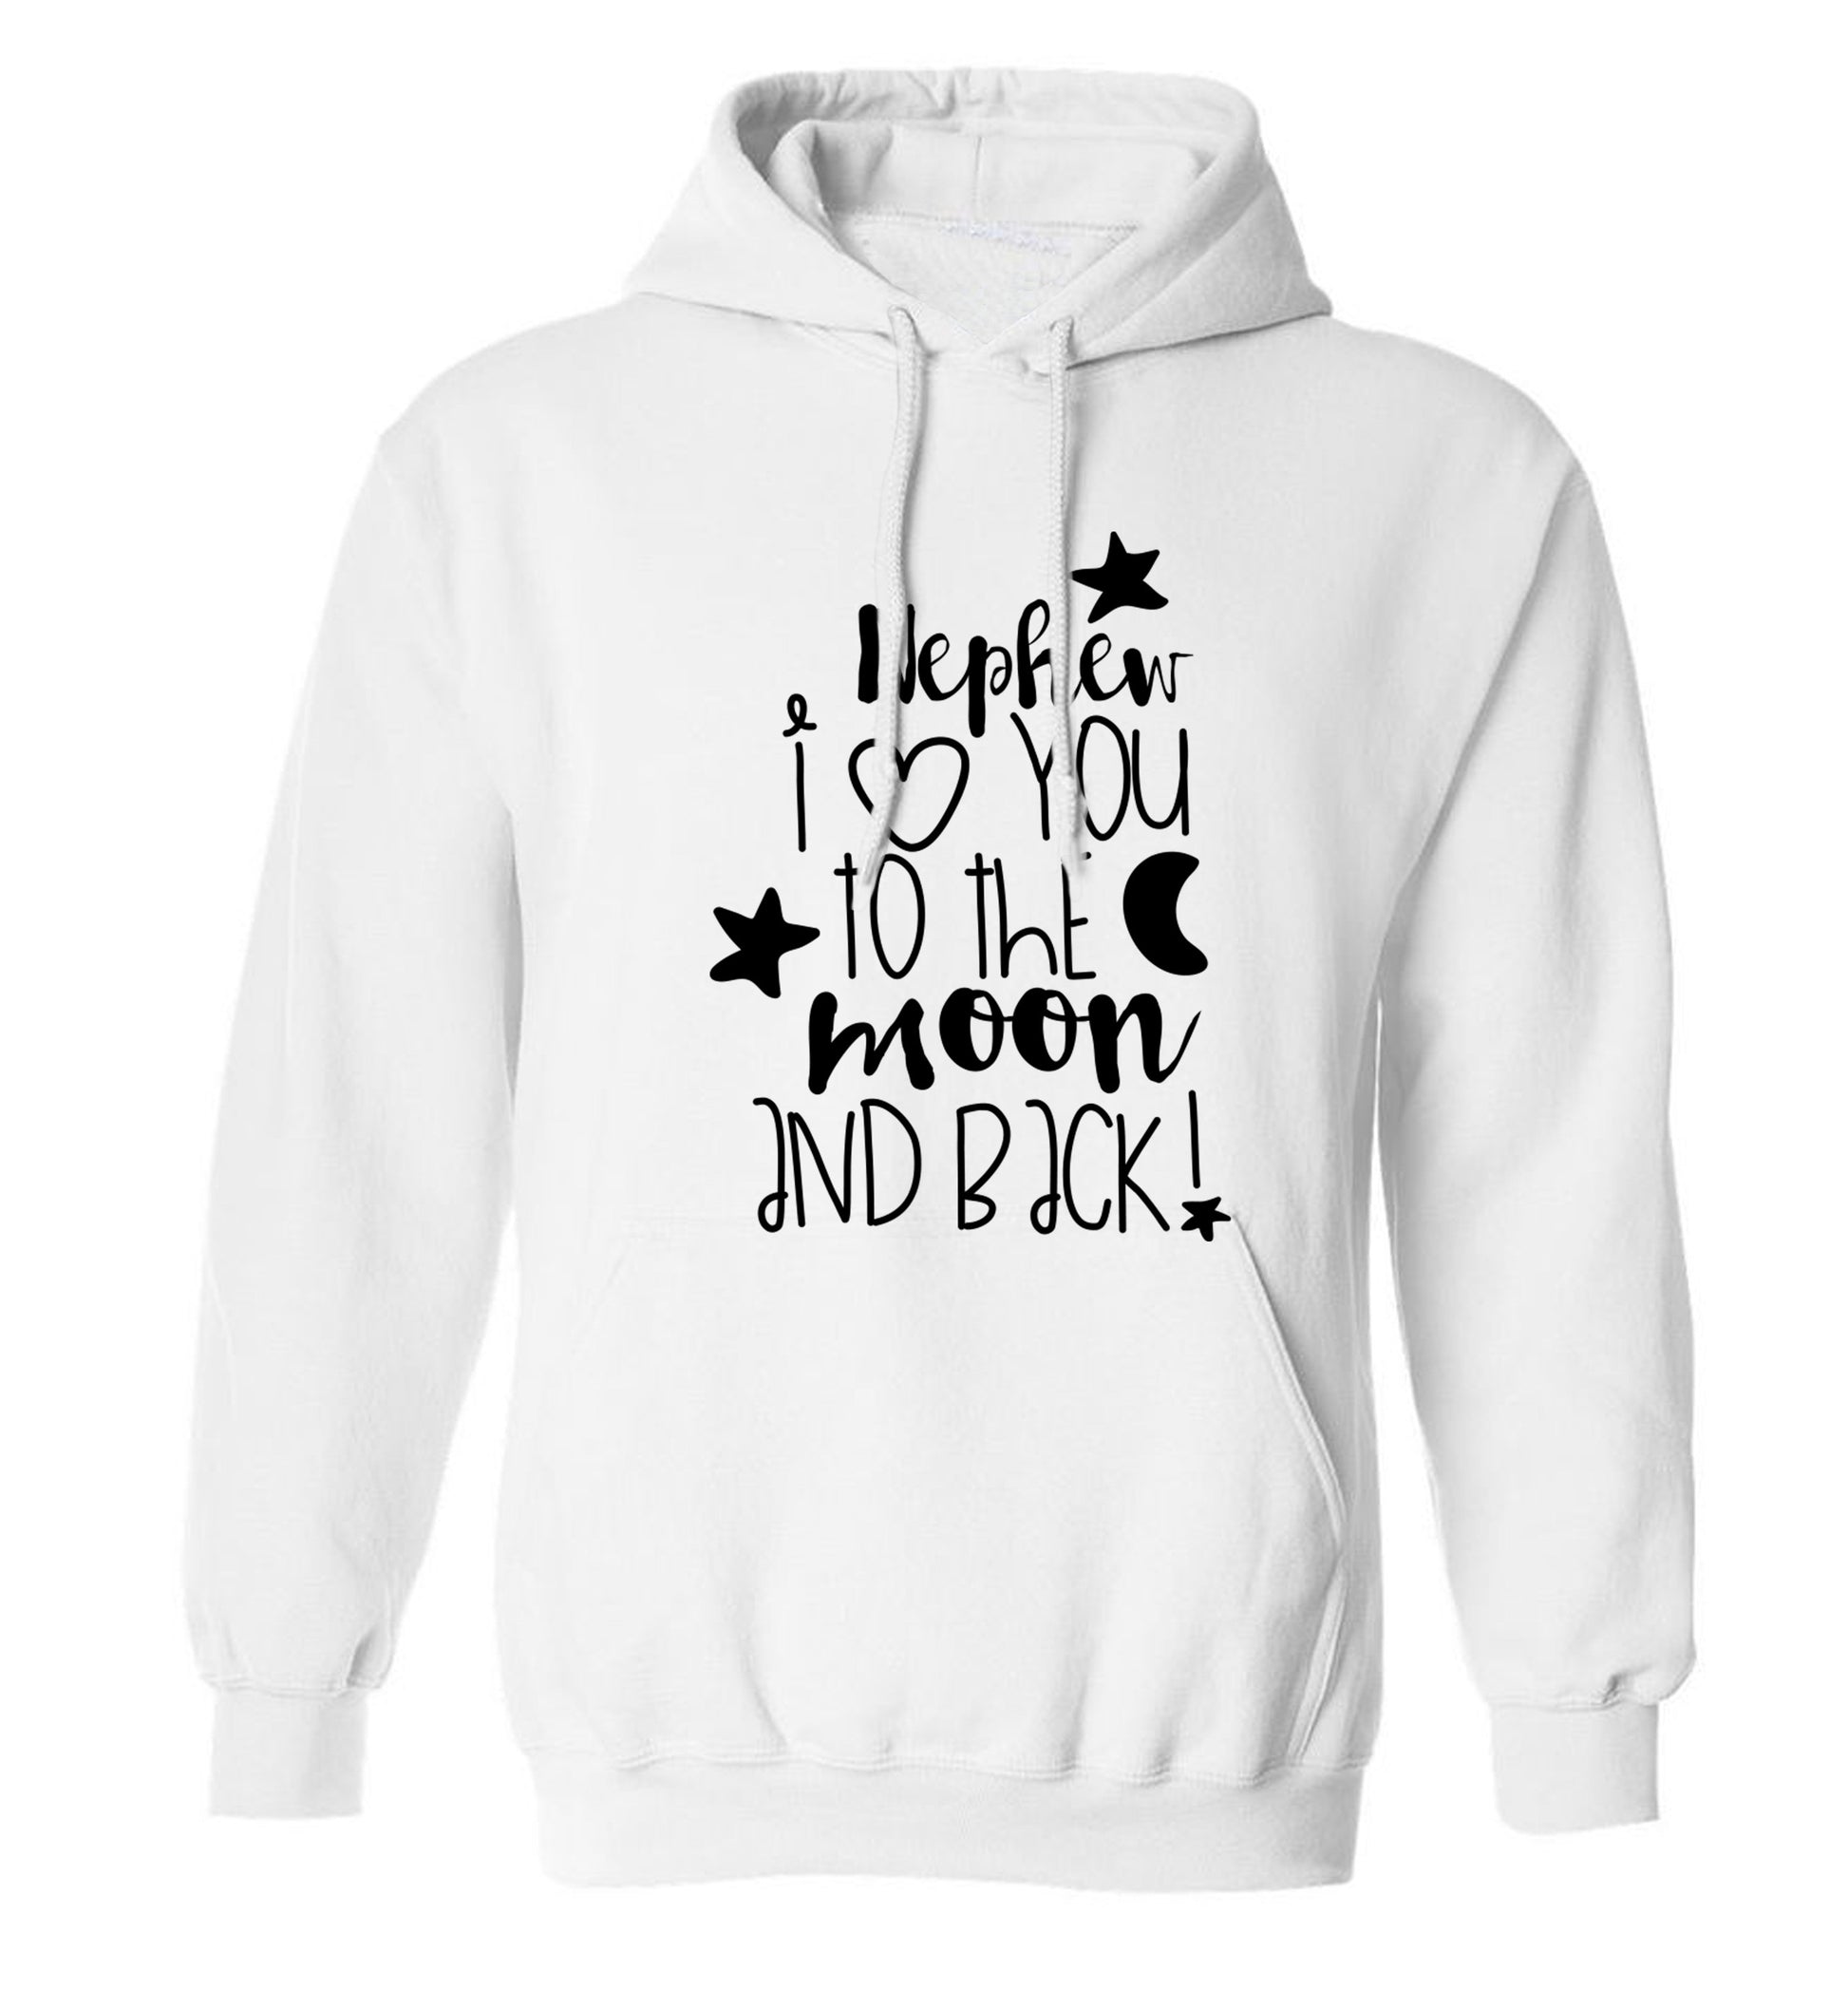 Nephew I love you to the moon and back adults unisex white hoodie 2XL